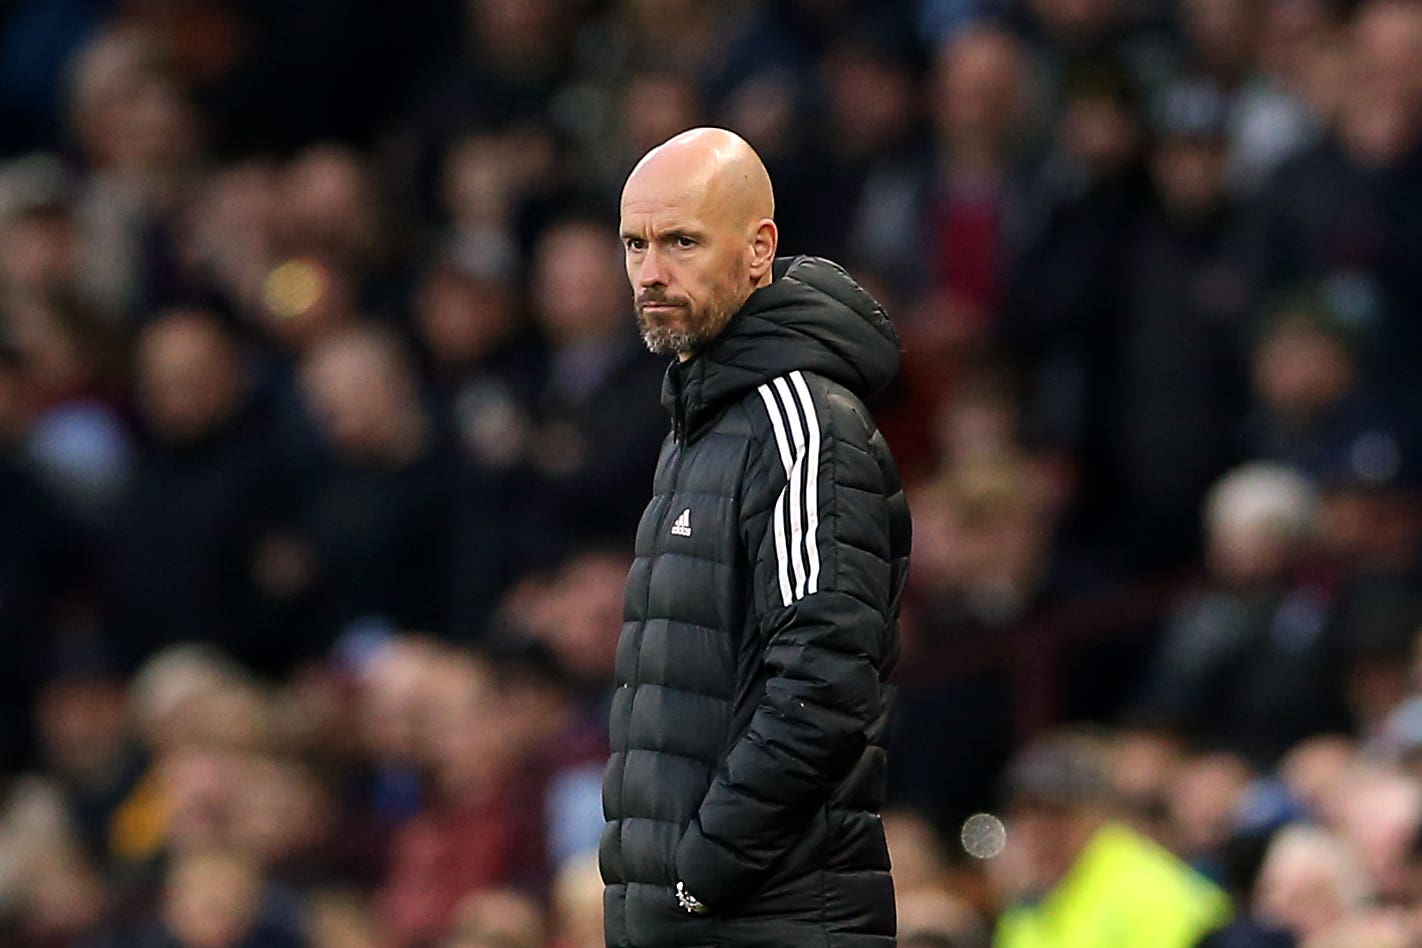 Erik ten Hag was unimpressed by Manchester United’s display at Aston Villa (Barrington Coombs/PA)